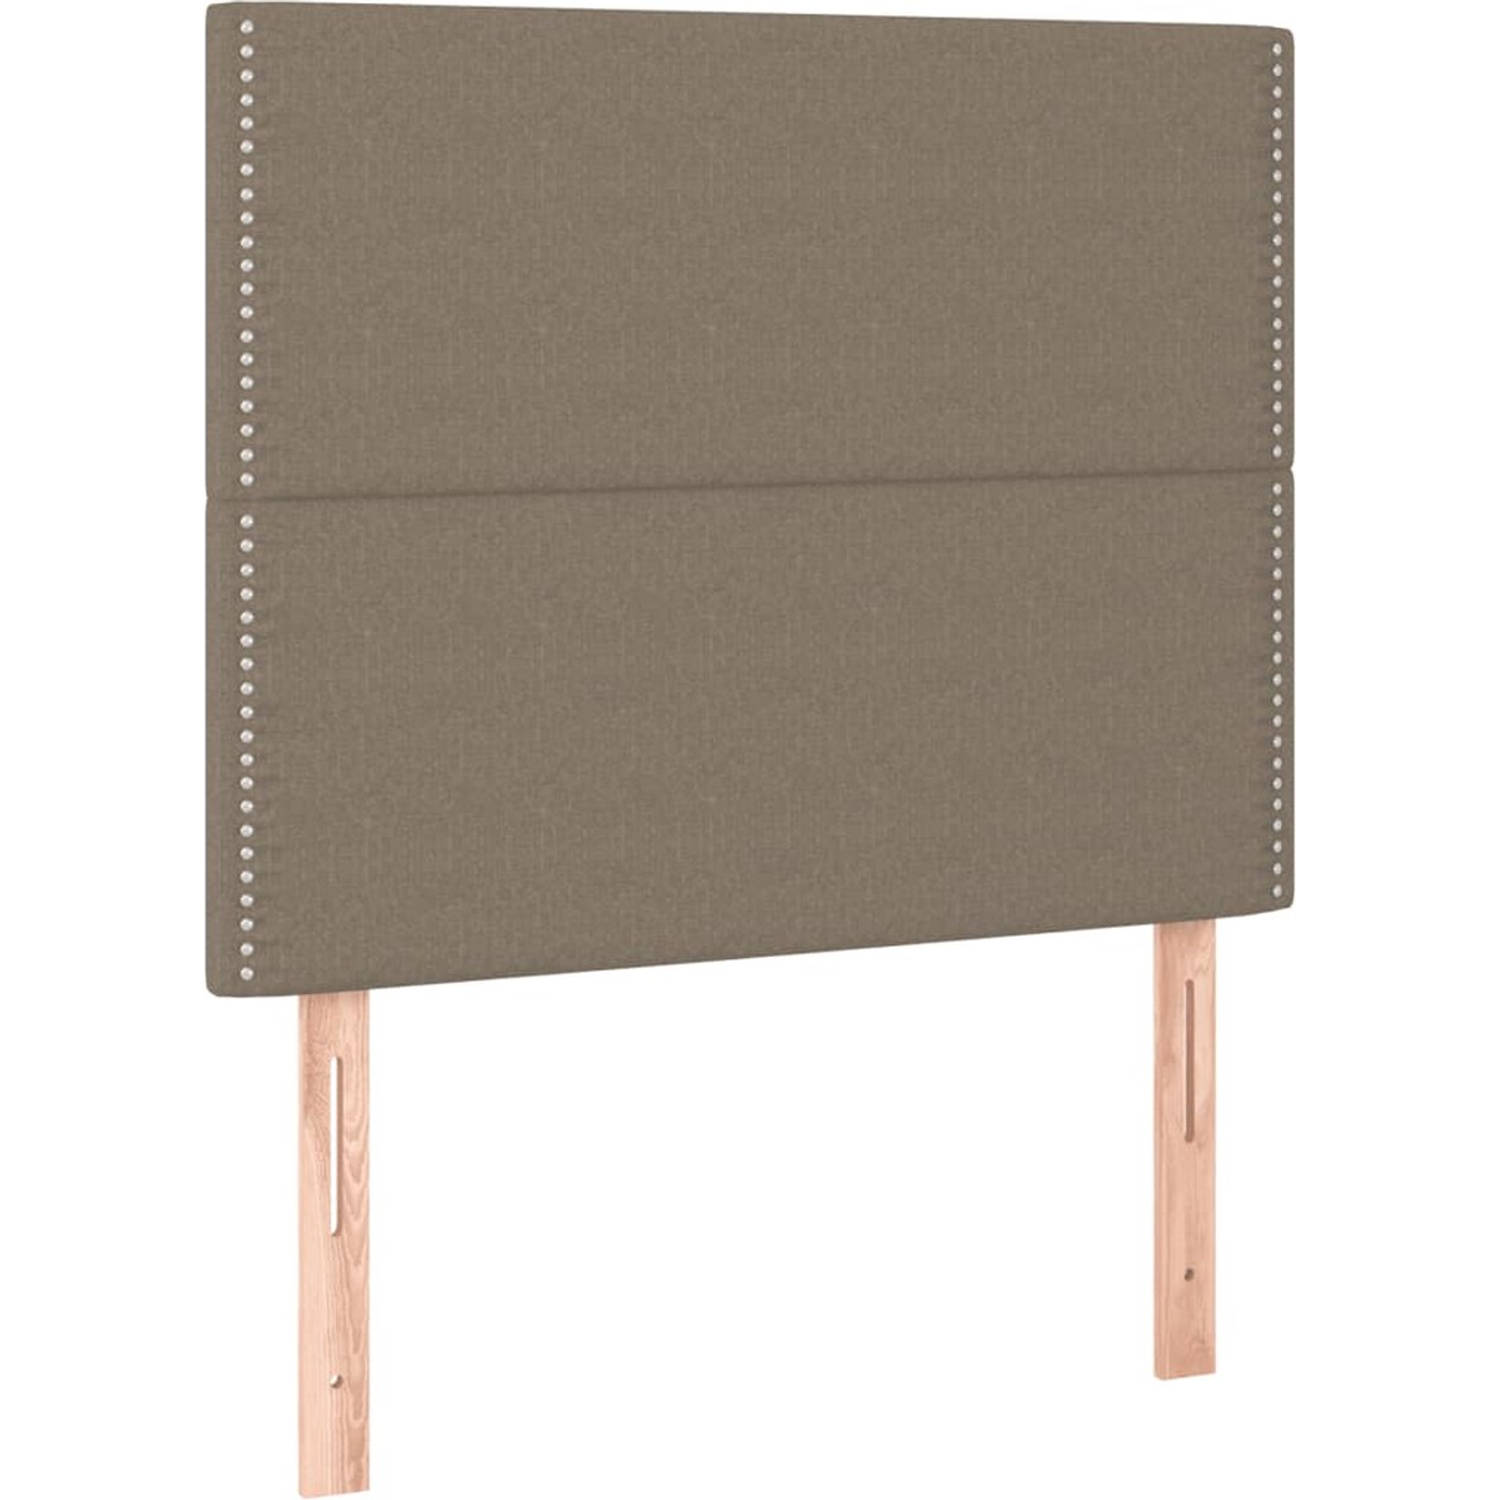 The Living Store Boxspringbed - Pocketvering - 90 x 200 cm - Taupe